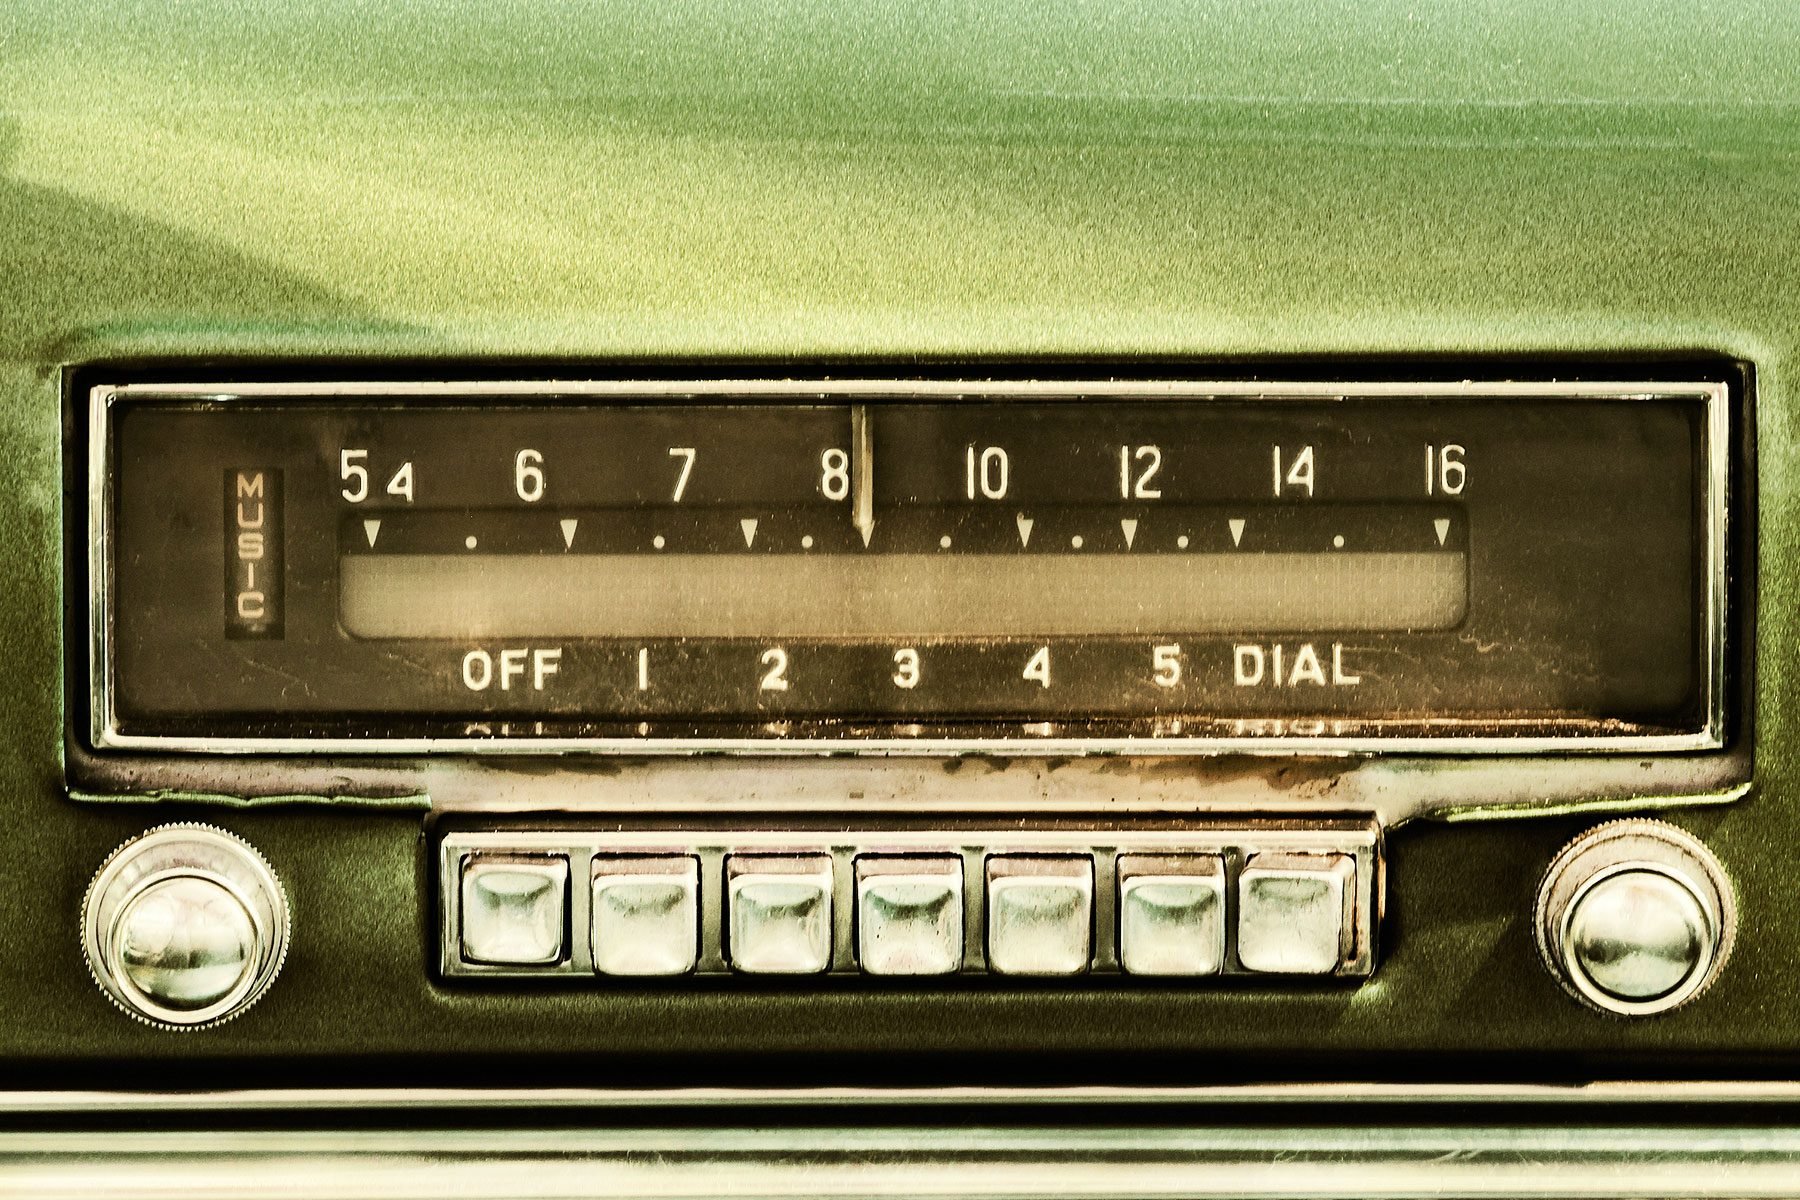 Say goodbye to AM radio: Why carmakers are removing it from new models